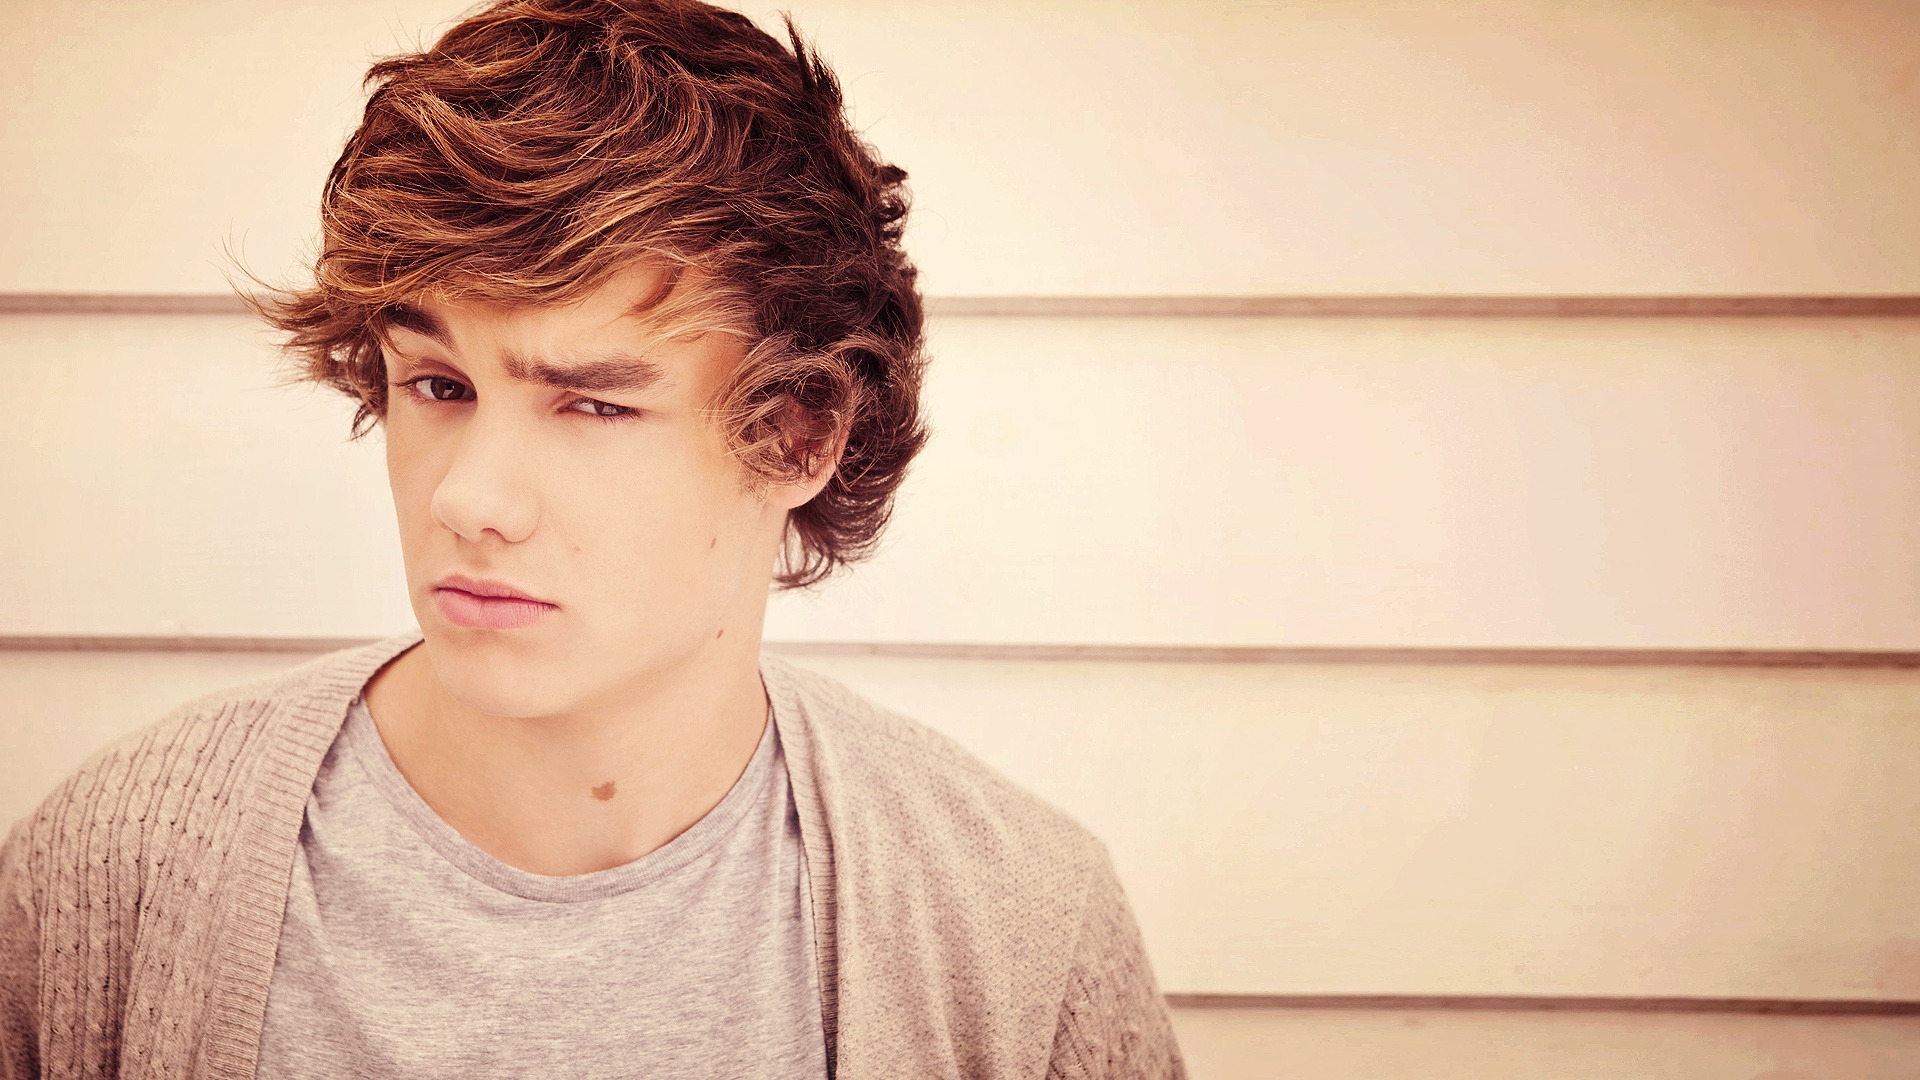 Liam Payne Look for 1920 x 1080 HDTV 1080p resolution